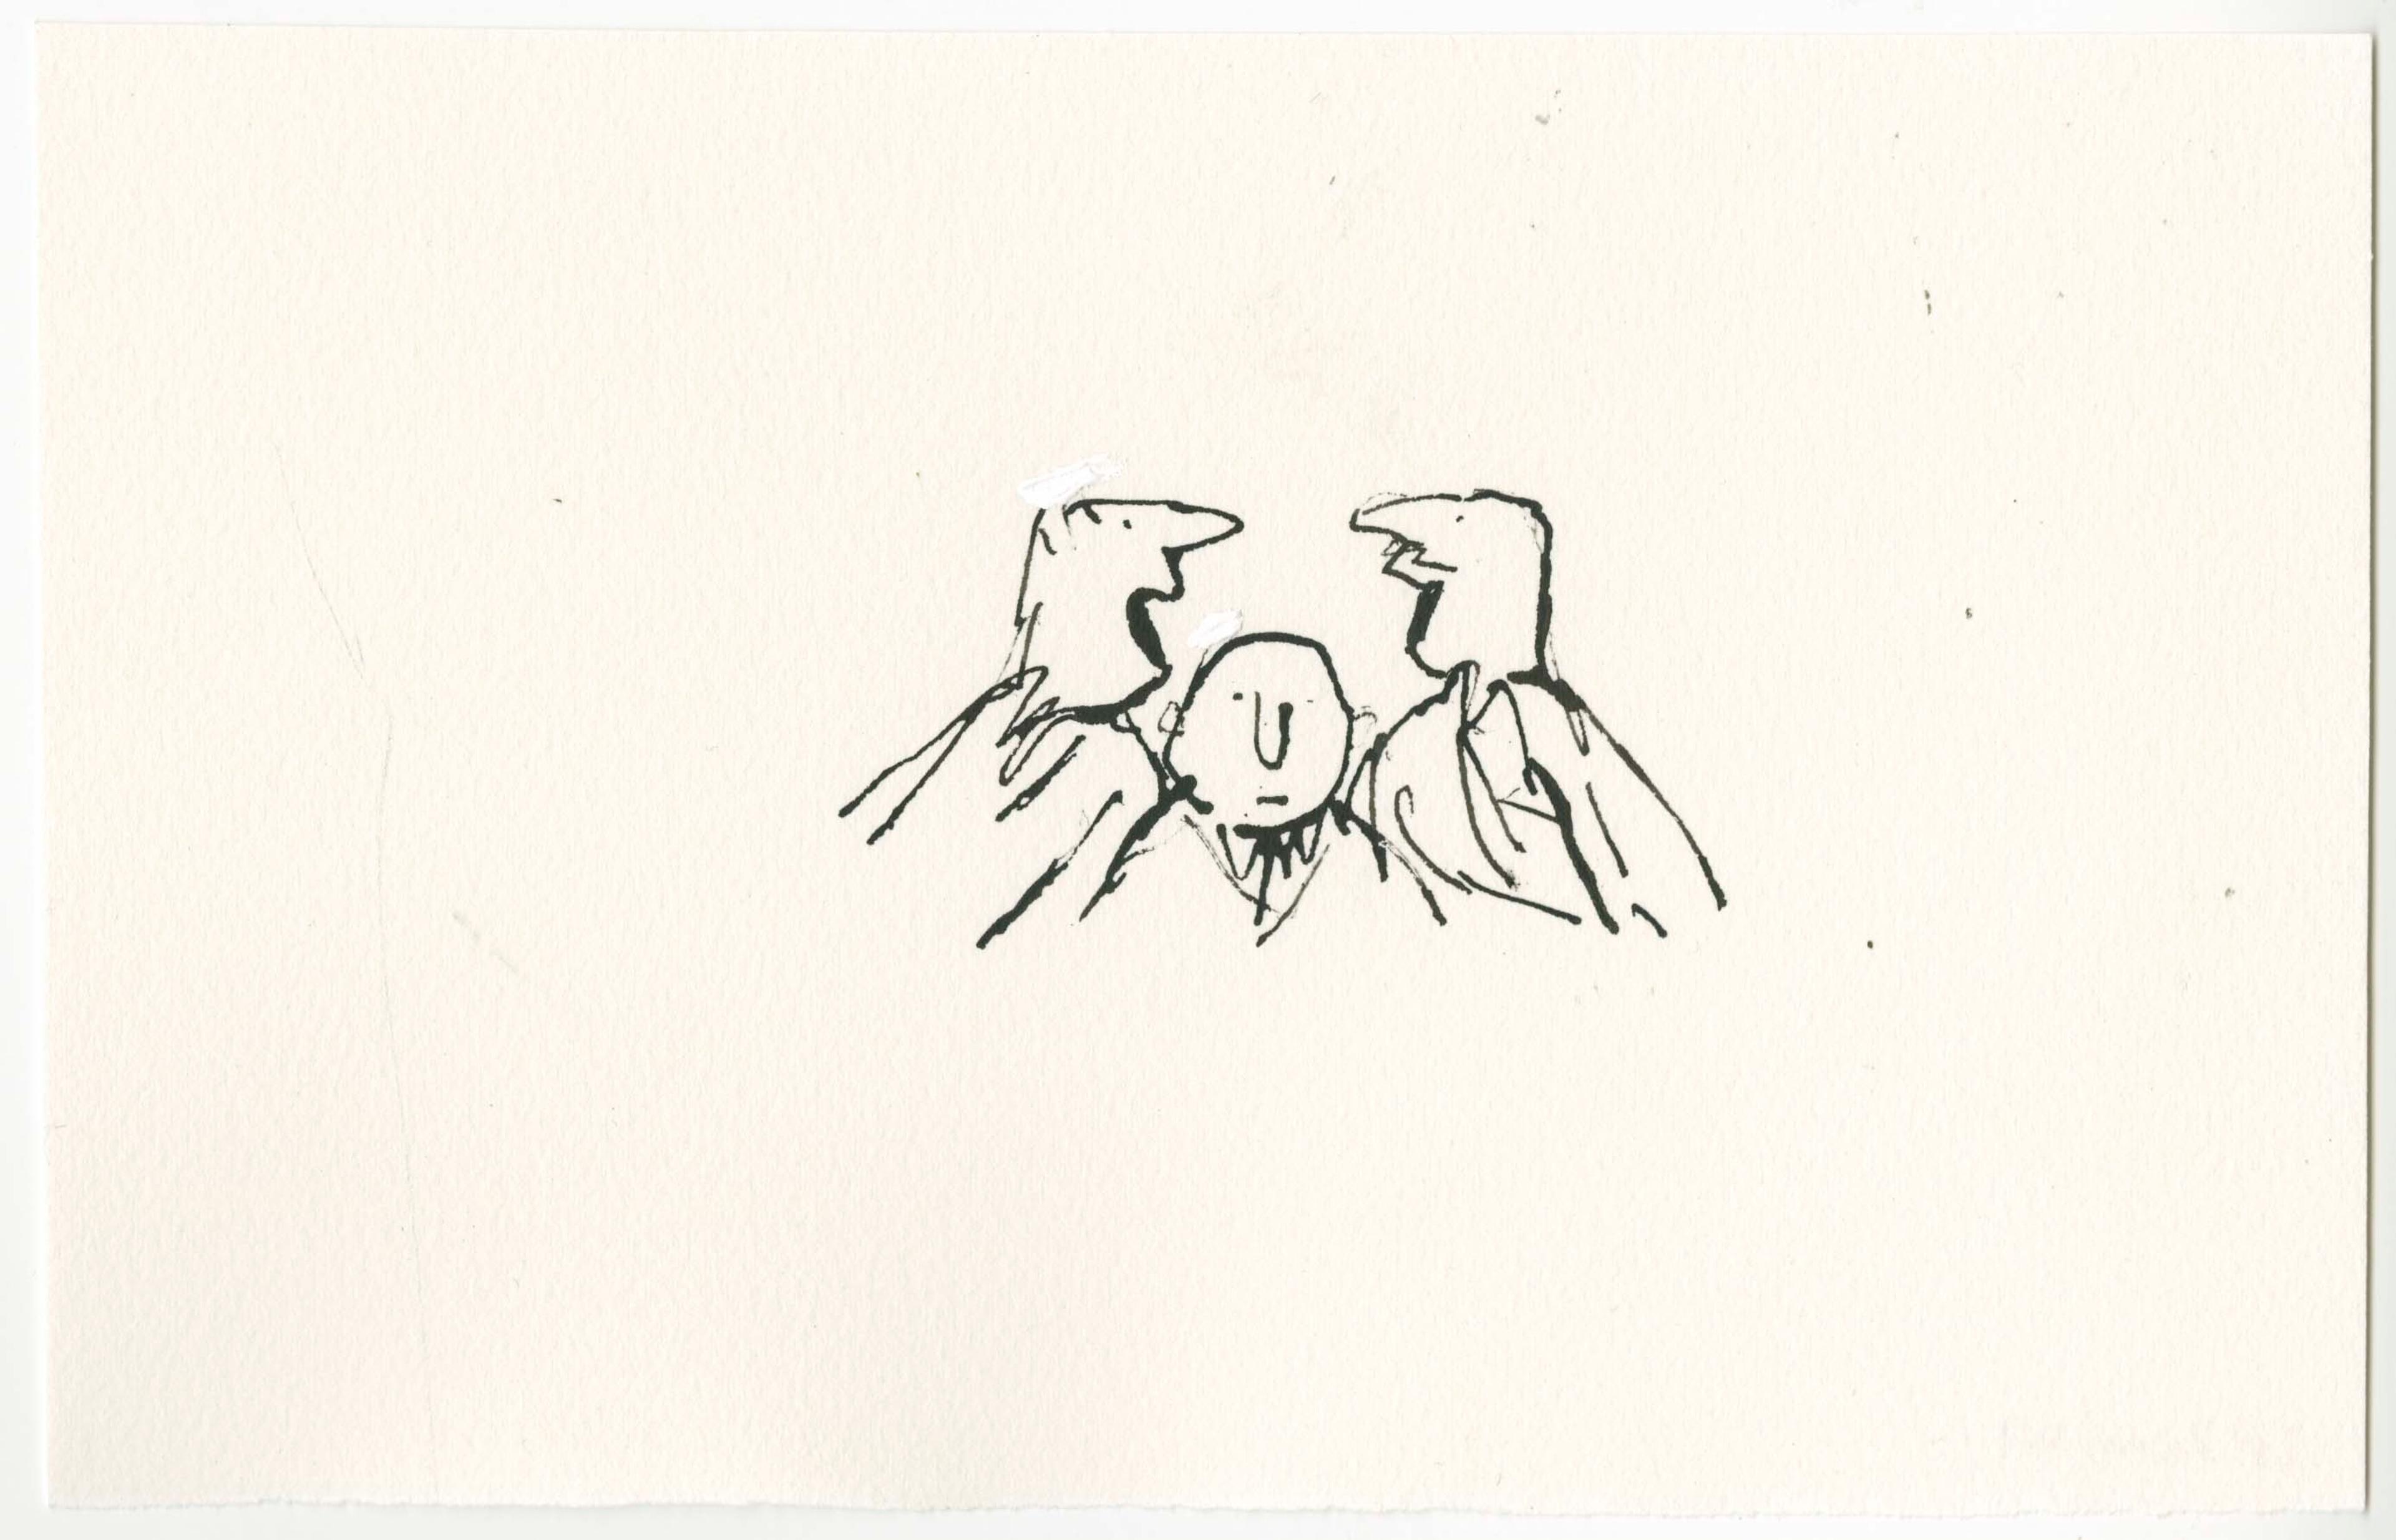 Funny drawing of two men talking, with a shorter man sandwiched between them. 